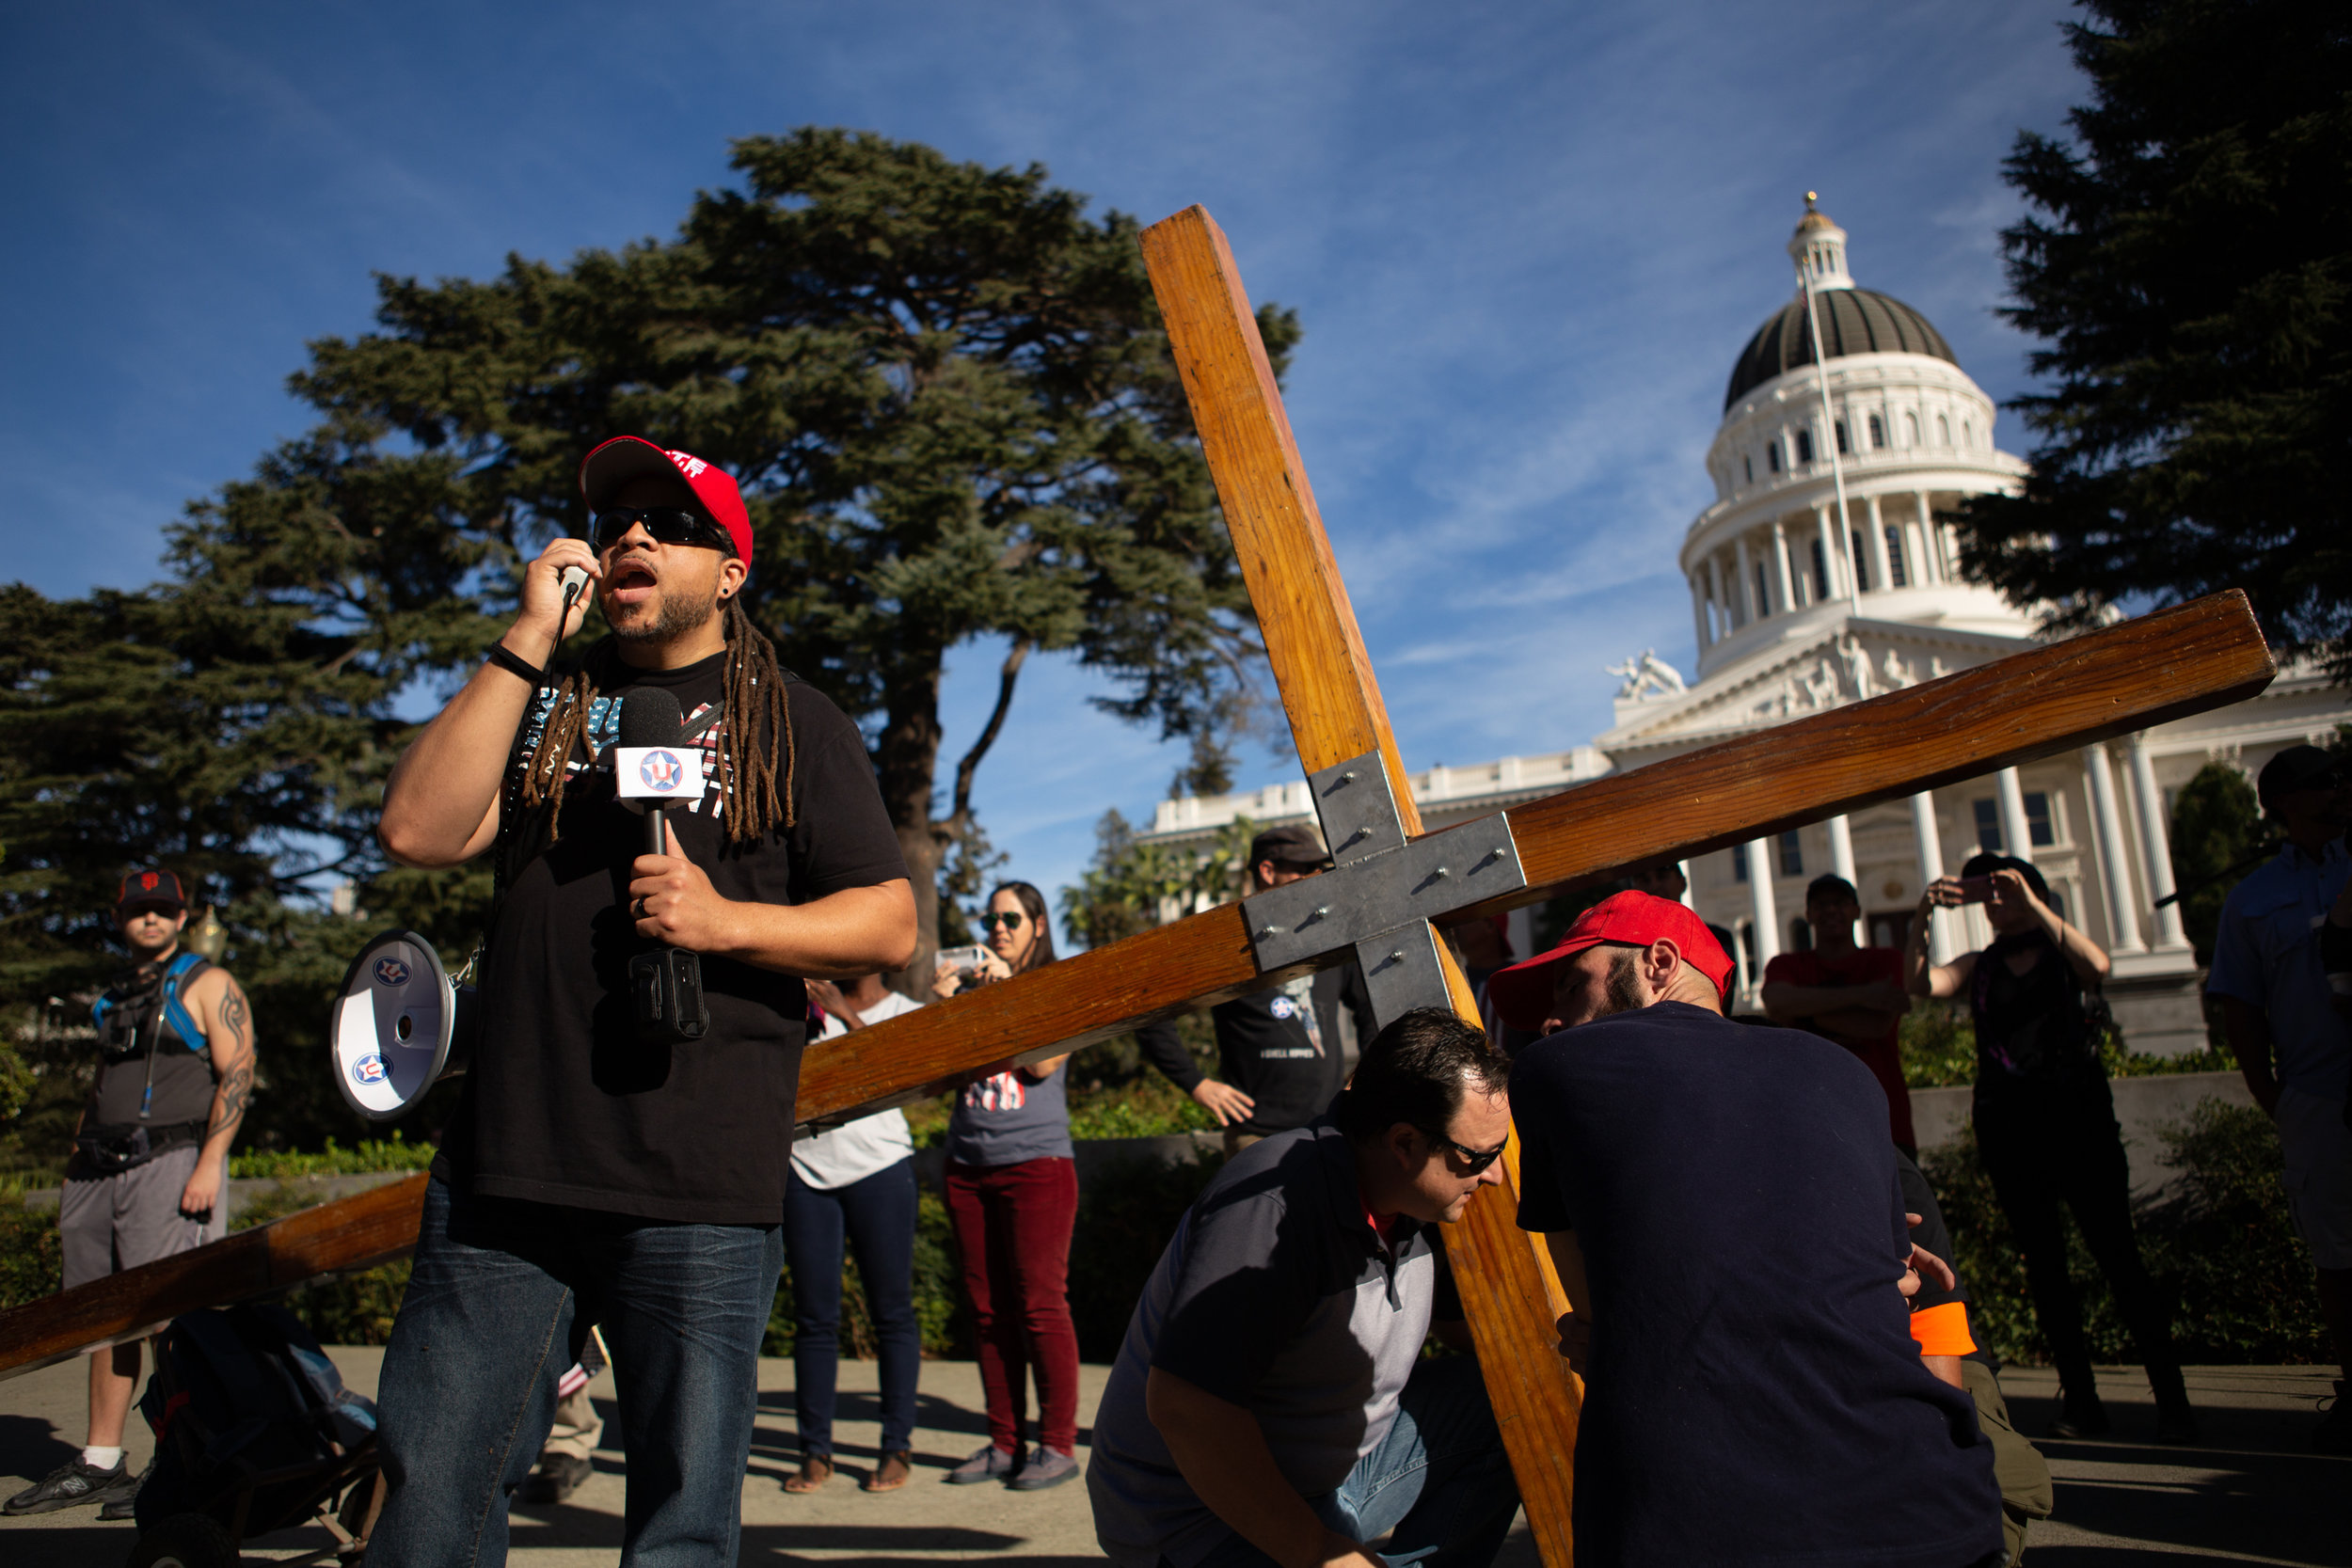  California conservatives assembled outside the steps of the state Capitol at 1pm in Sacramento, CA on November 4th to drum up support leading up to the November midterm elections. The demonstration had the required permits and remained largely fence